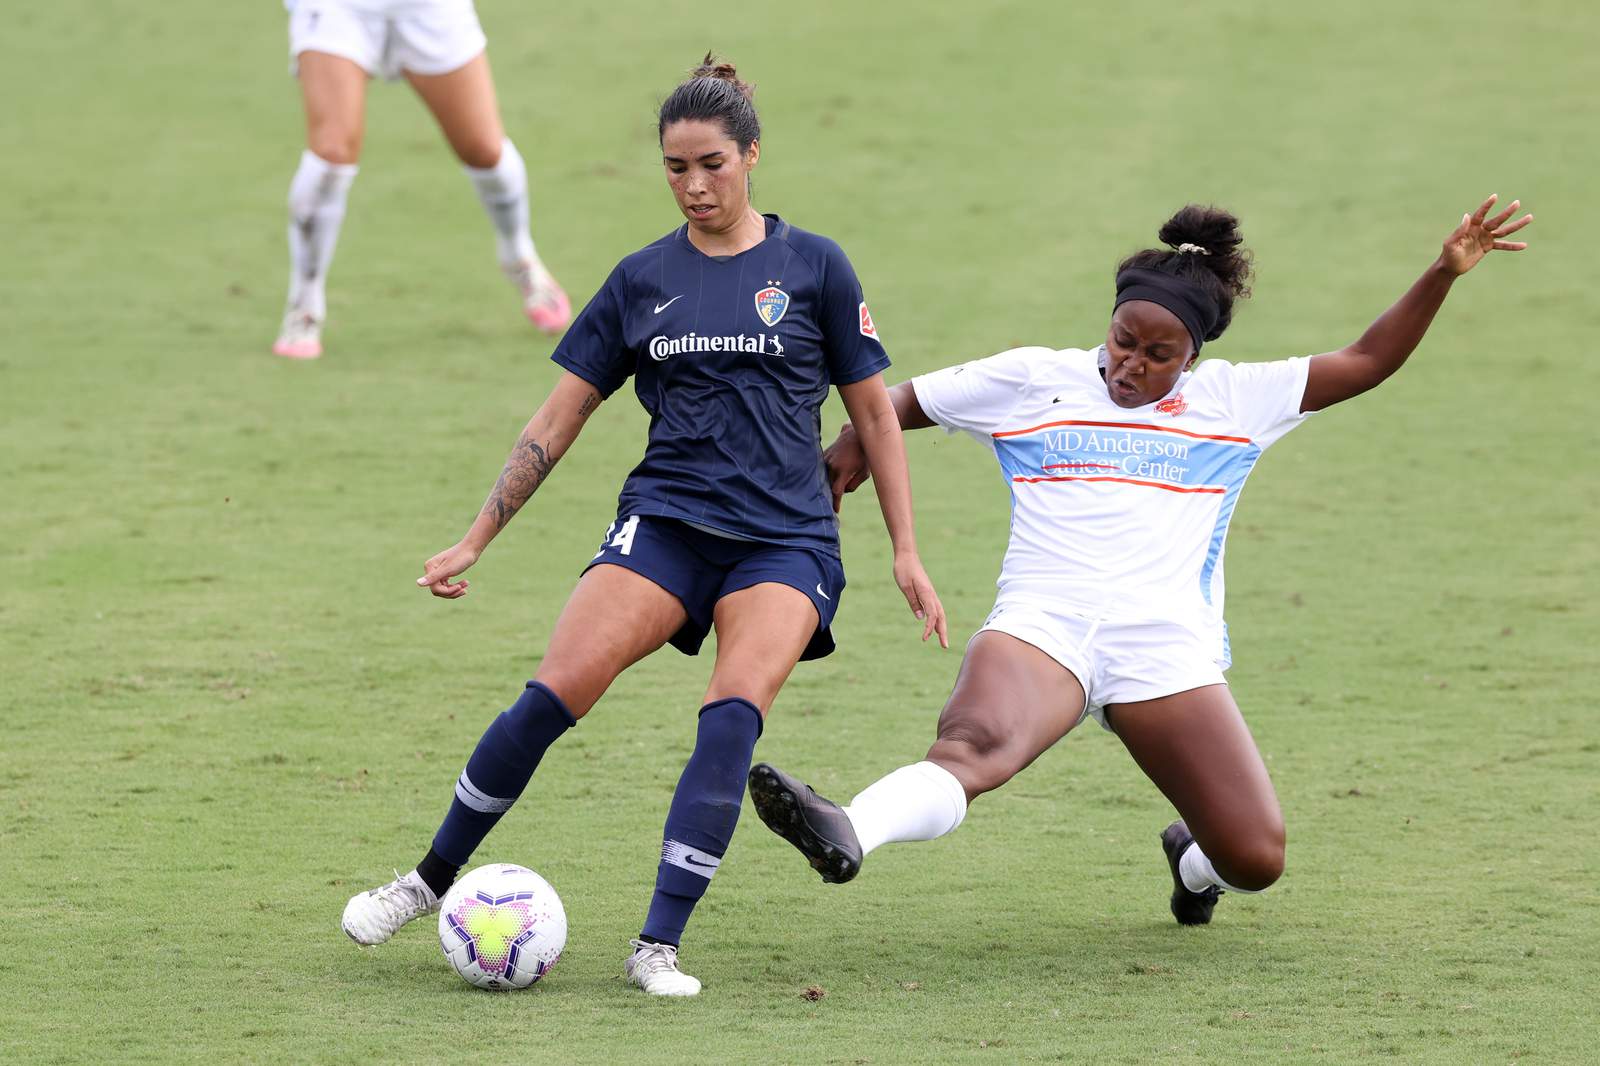 Dash defeat Courage 4-1 in NWSL’s fall series